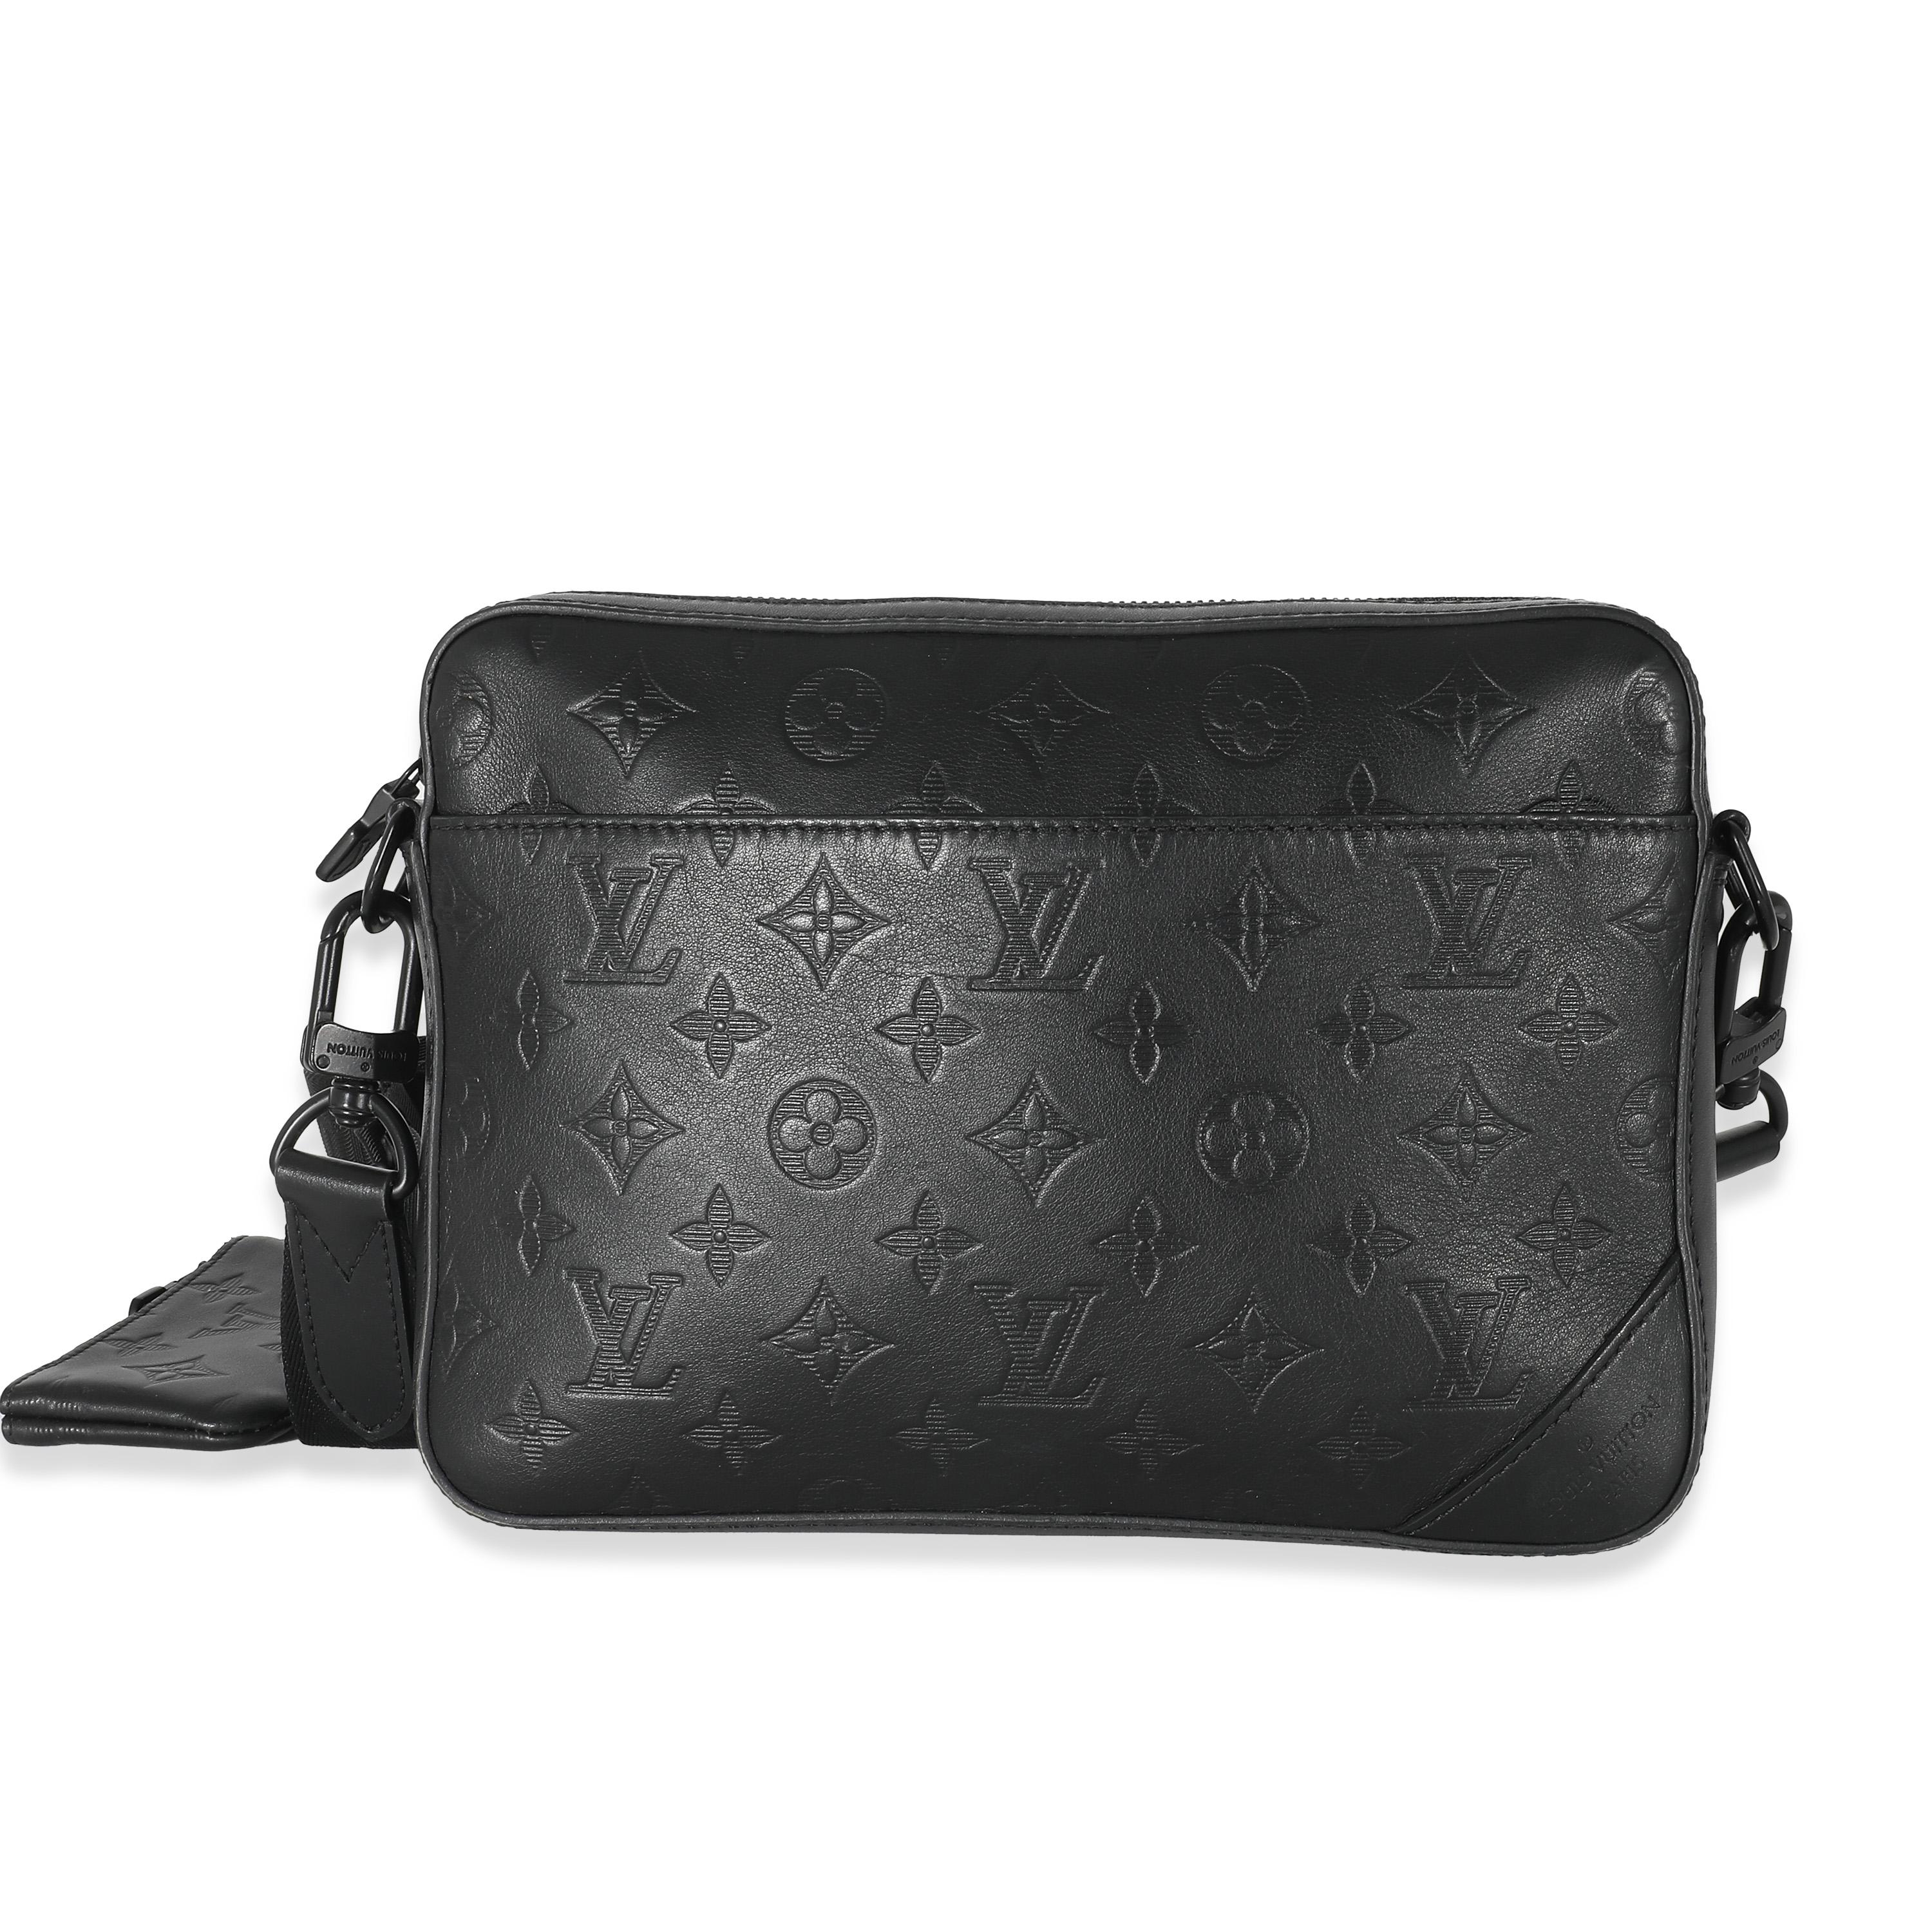 Louis Vuitton Black Monogram Shadow Duo Messenger In Excellent Condition For Sale In New York, NY